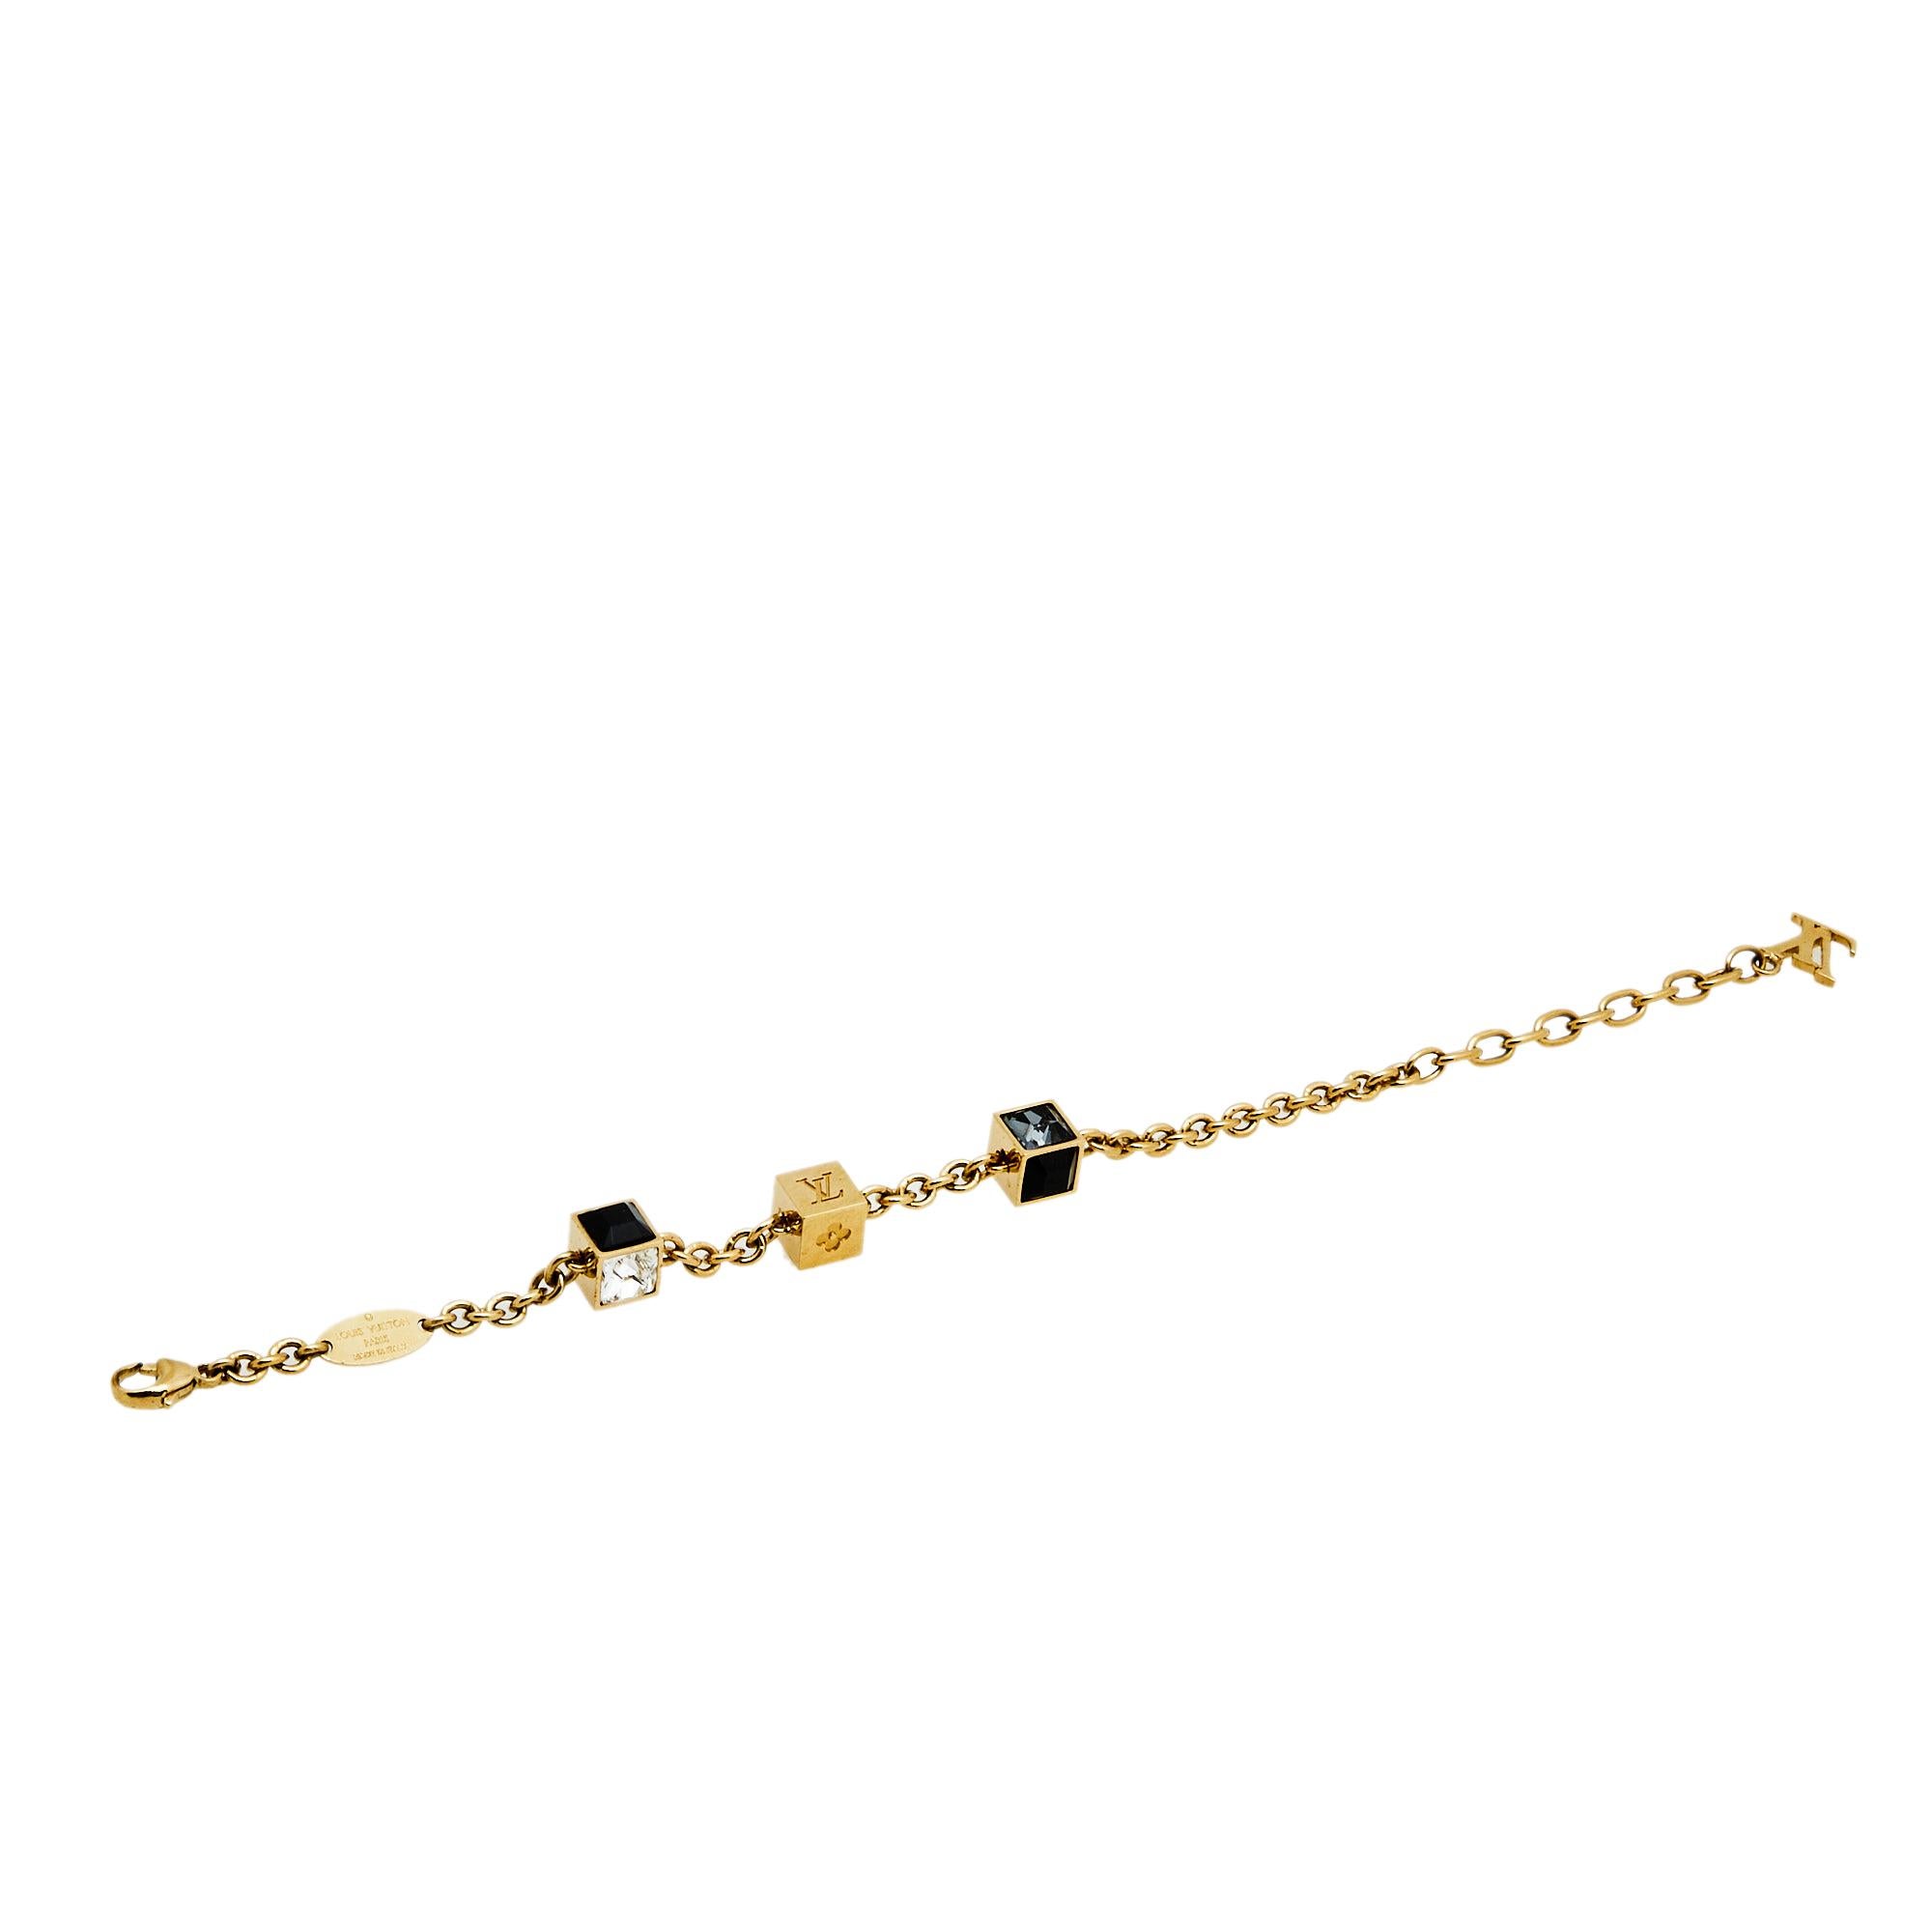 Artfully made from gold-tone metal, this flawless bracelet by Louis Vuitton can be your next prized possession. Featuring a gorgeous set of 3 cubes with monogram engravings and crystals, the design has been finished with the signature LV logo and a